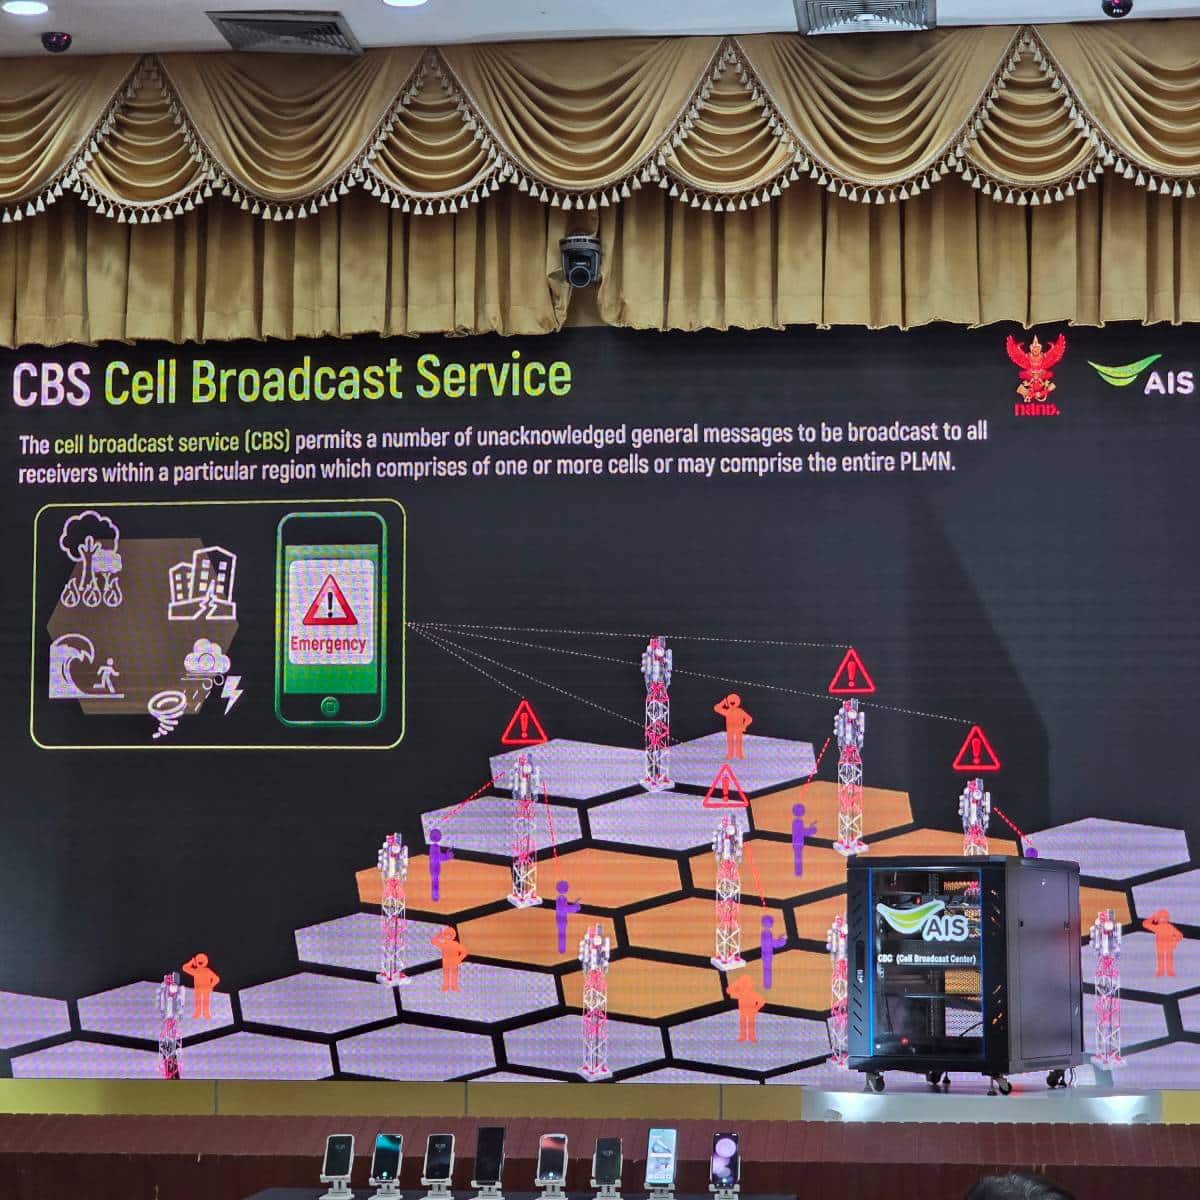 AIS Cell Broadcast Service